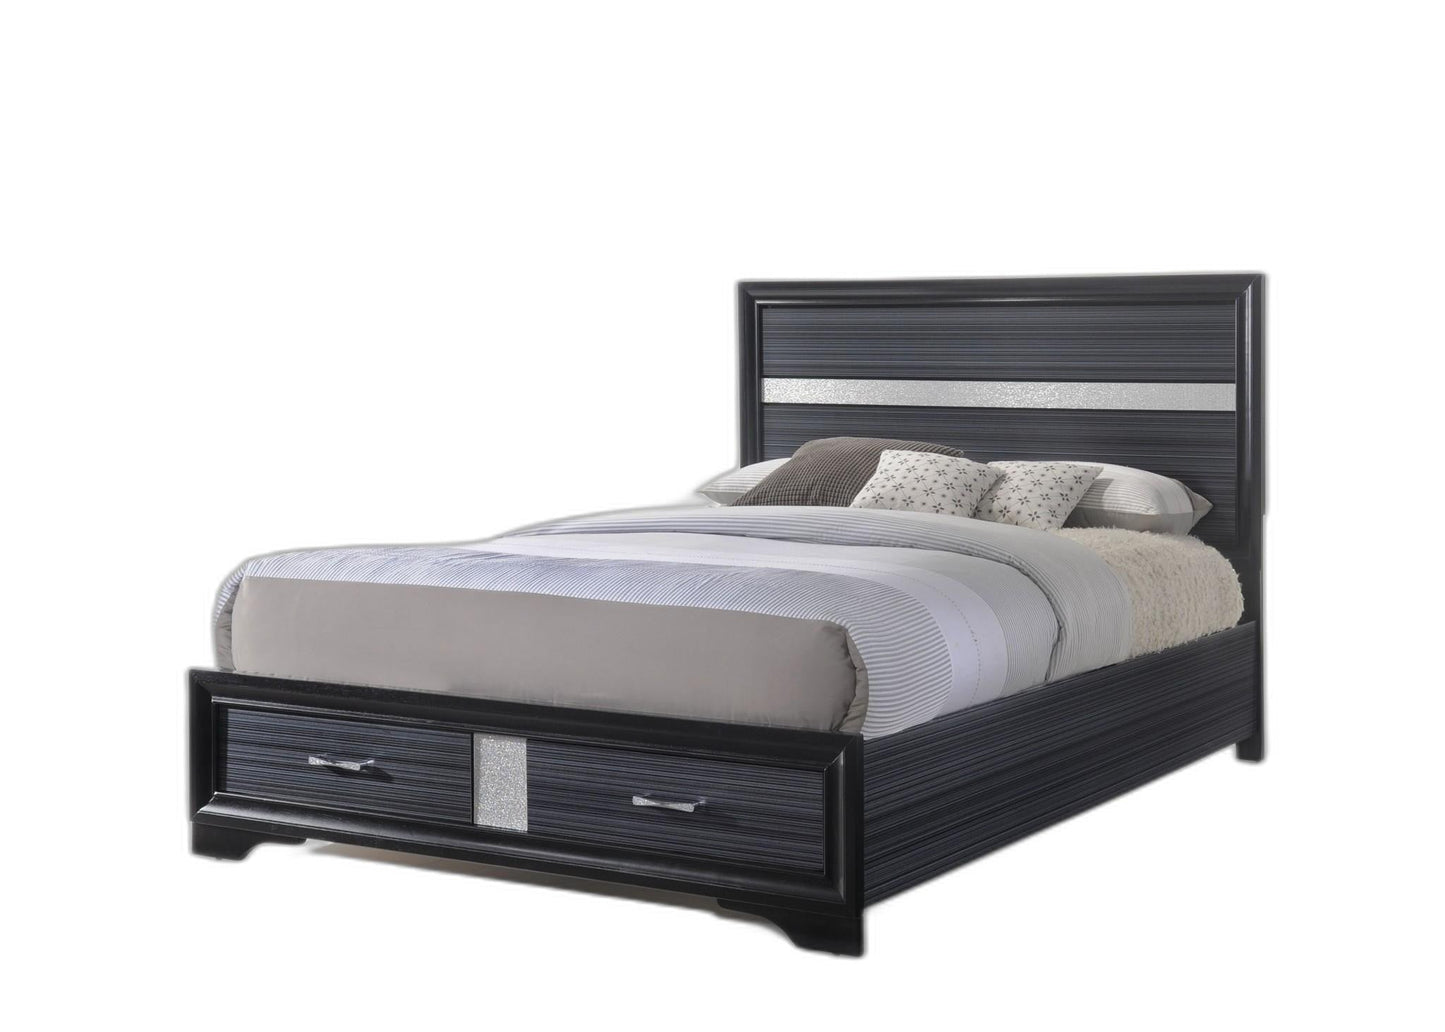 63inches X 84inches X 50inches Black Wood Queen Bed wStorage